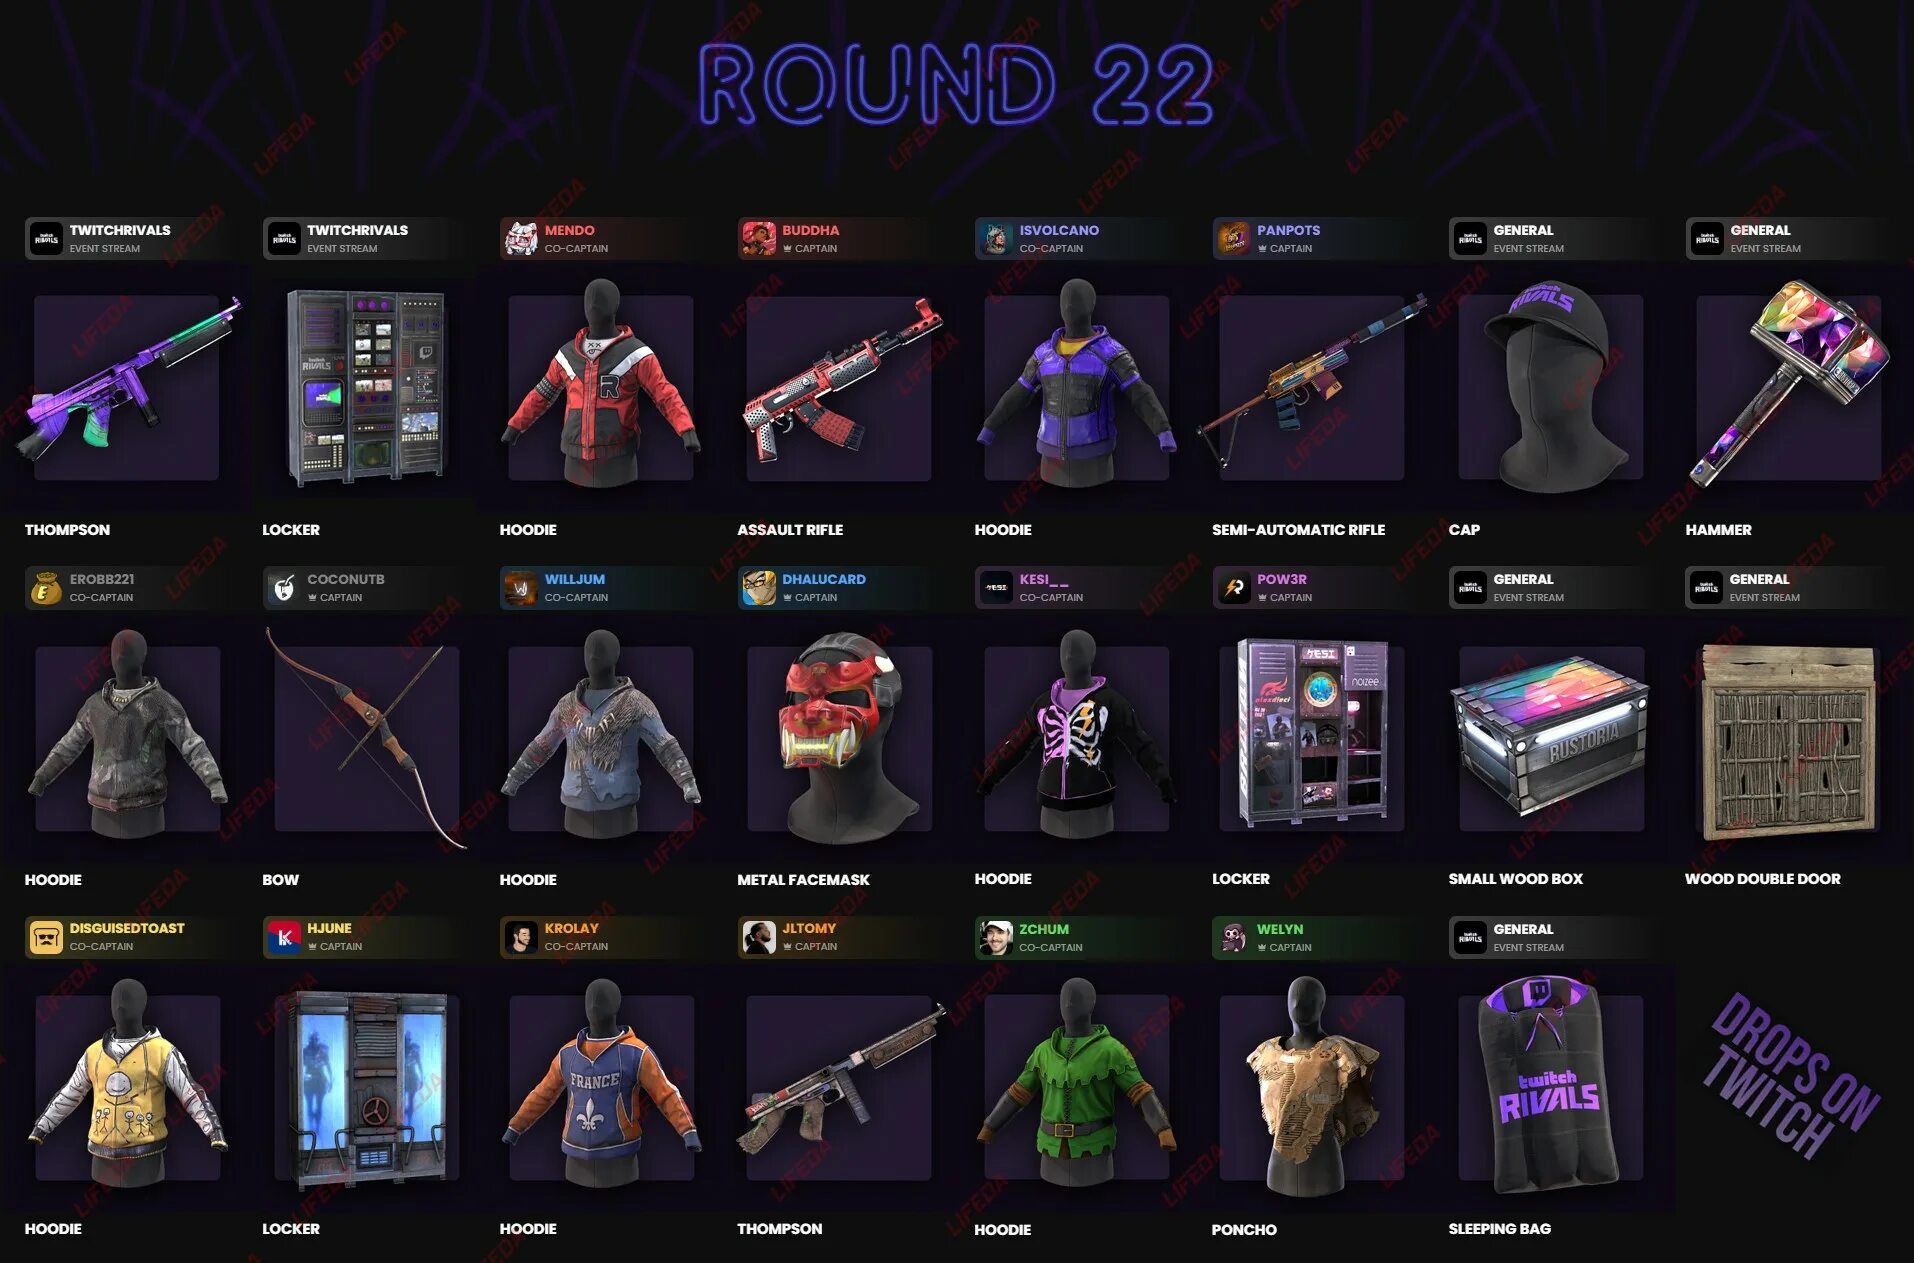 23 Round twitch Drops Rust. 21 Раунд Твич Дропс раст. 22 Раунд Твич Дропс раст. Твич дроп раунд 23. Твич дропс раст 2022